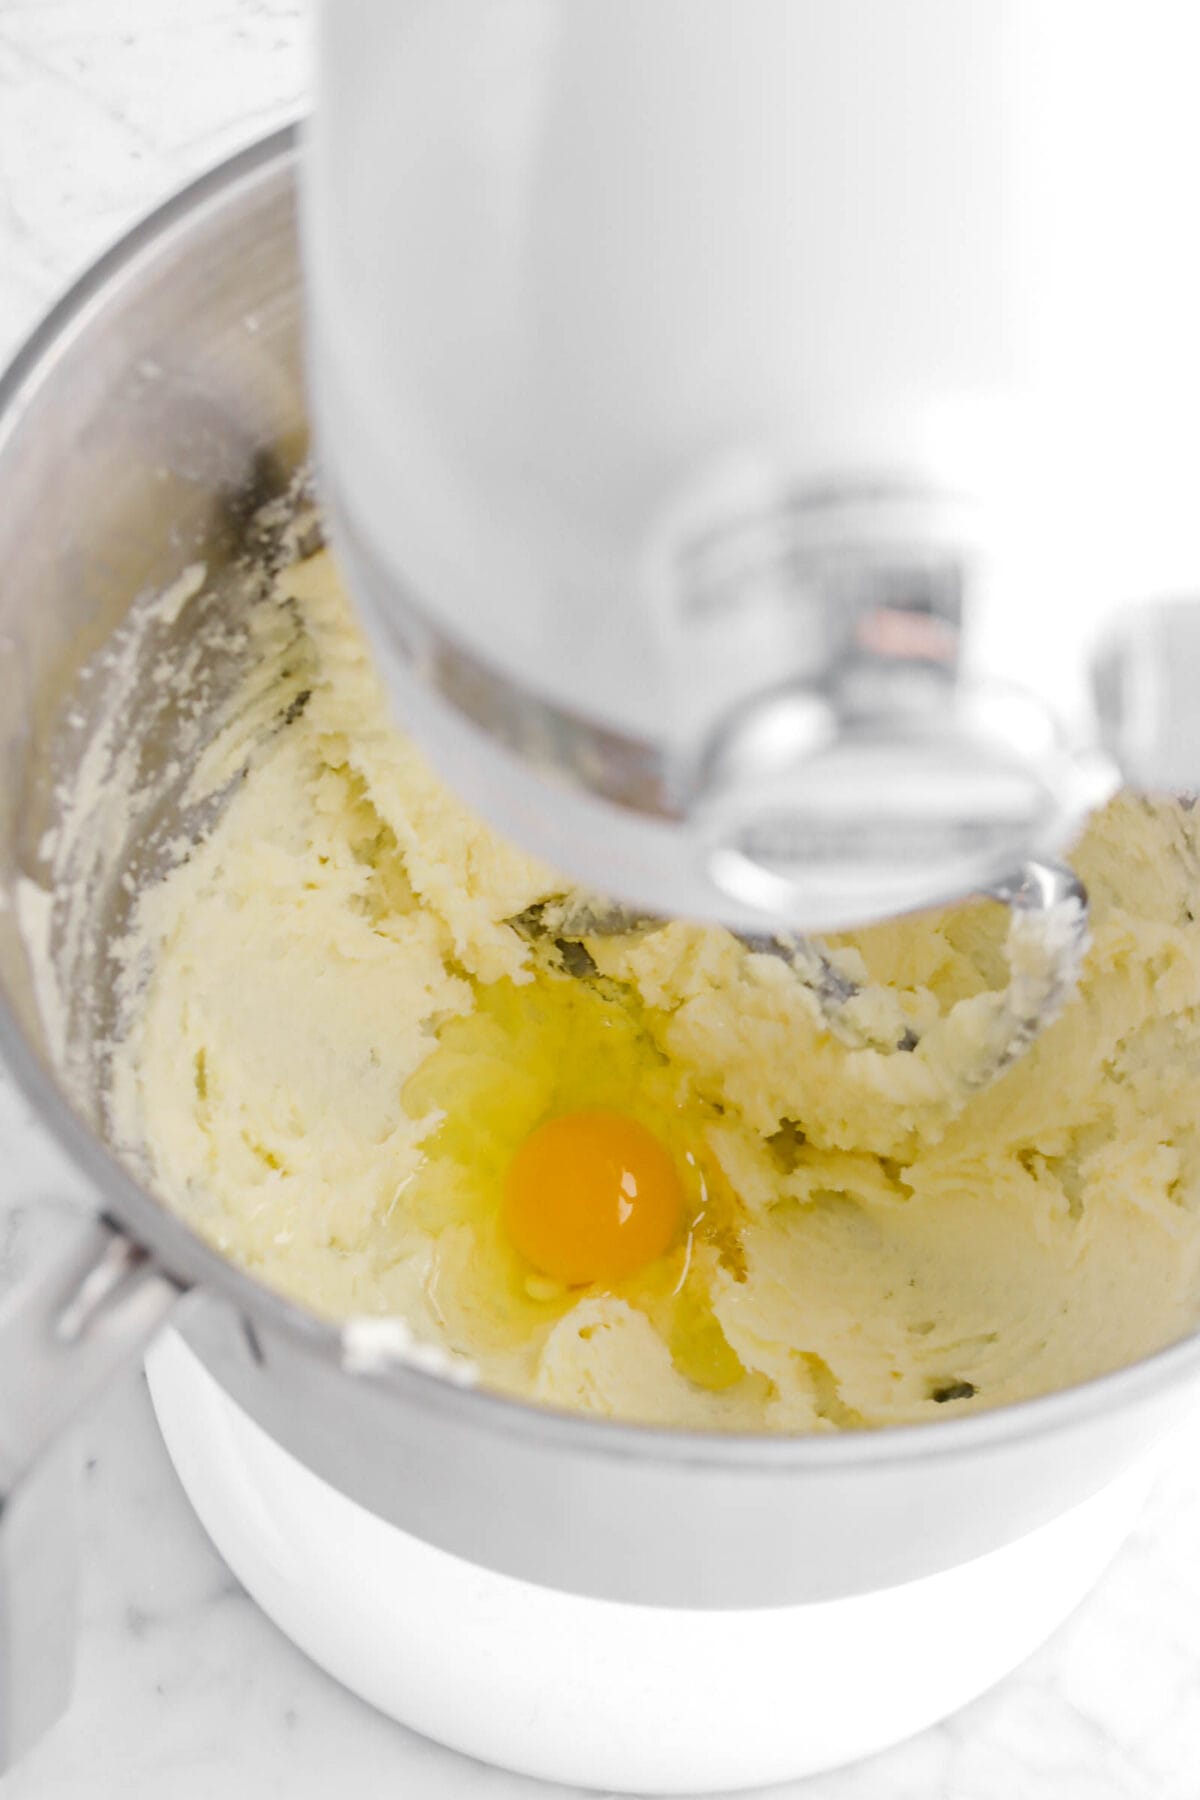 egg added to butter and sugar mixture